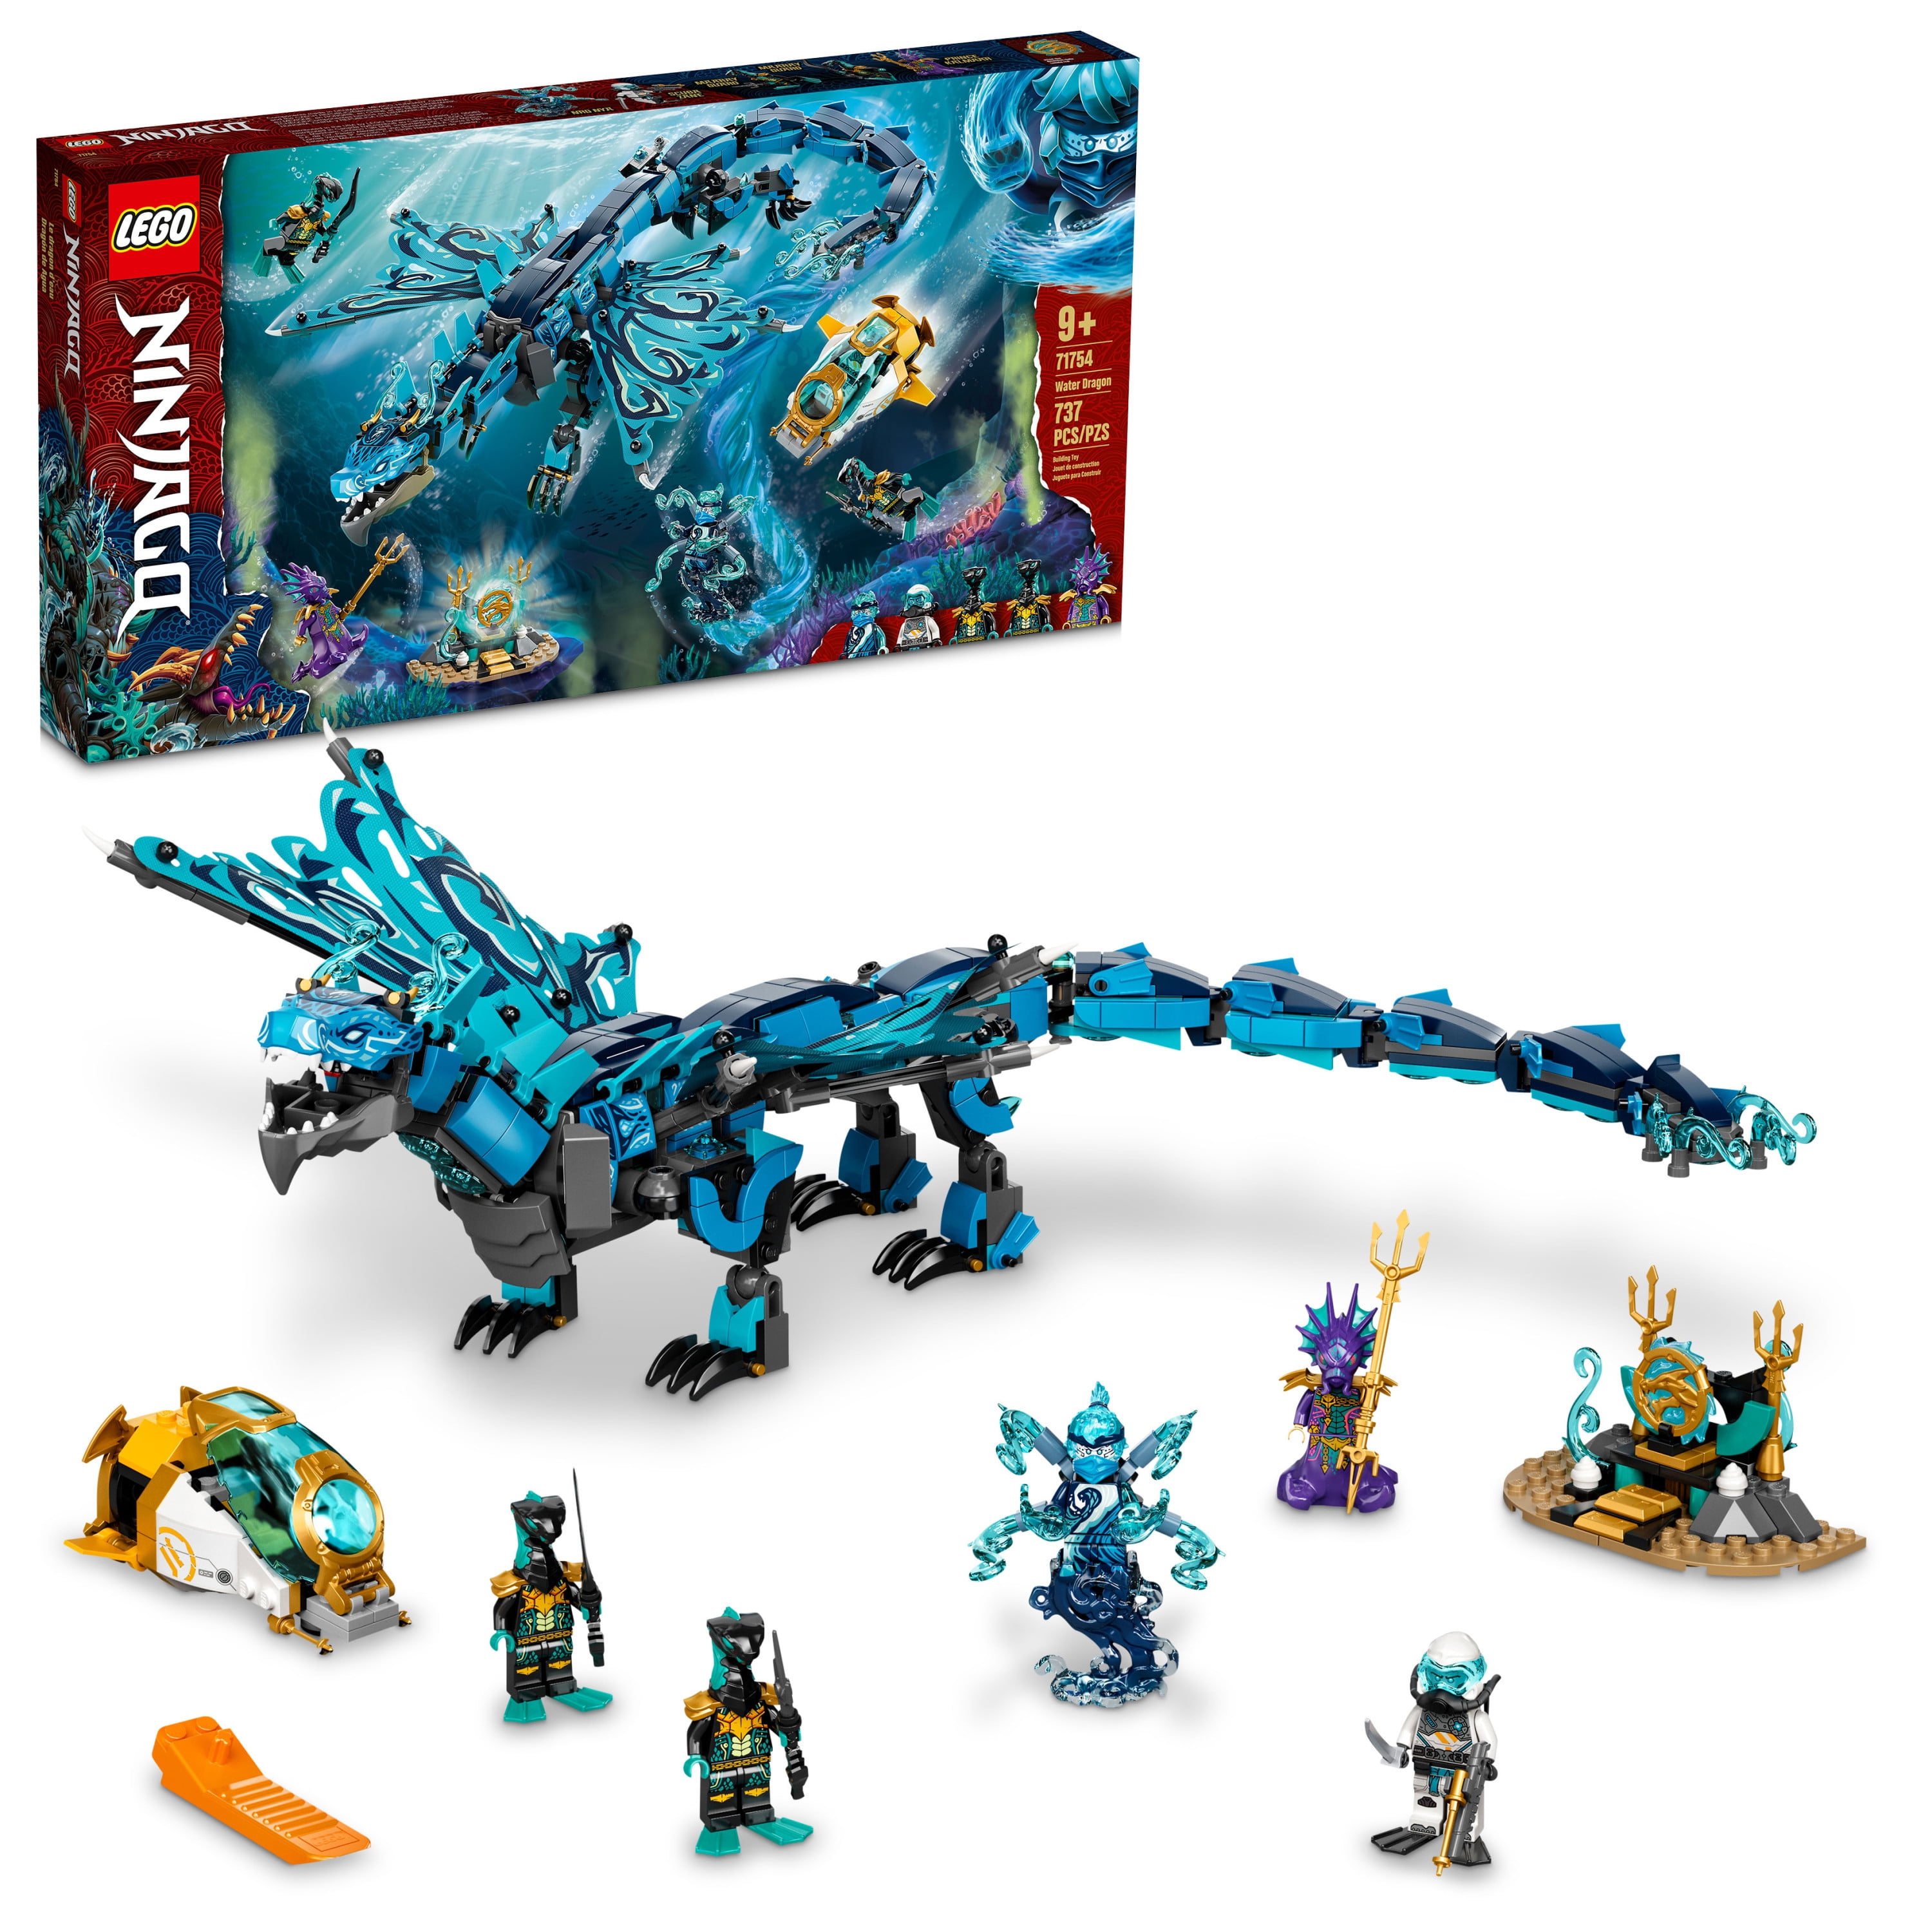 LEGO Water Dragon 71754 Building Set with 5 Minifigures and Weapons, Ninja Gifts for 9 Plus Years Old Kids, Boys Girls - Walmart.com